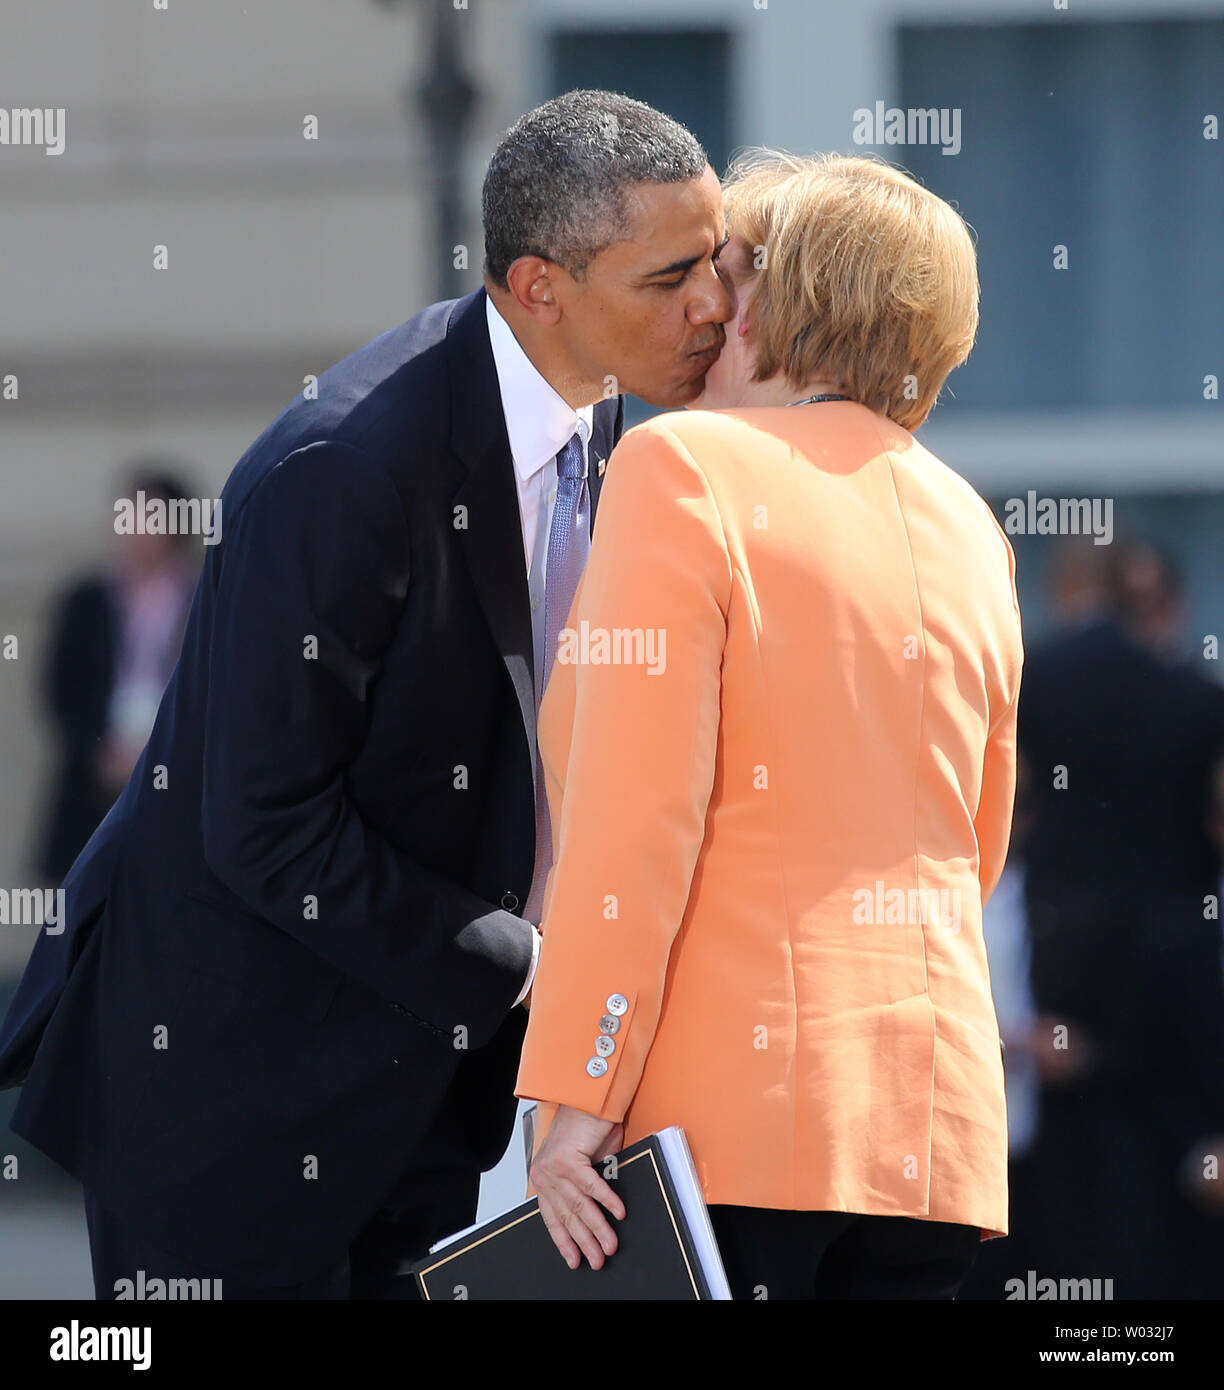 U.S. President Barack Obama kisses German Chancellor Angela Merkel after  she finished her speech at the Brandenburg Gate in Berlin on June 19, 2013.  Obama is in Berlin on his first official